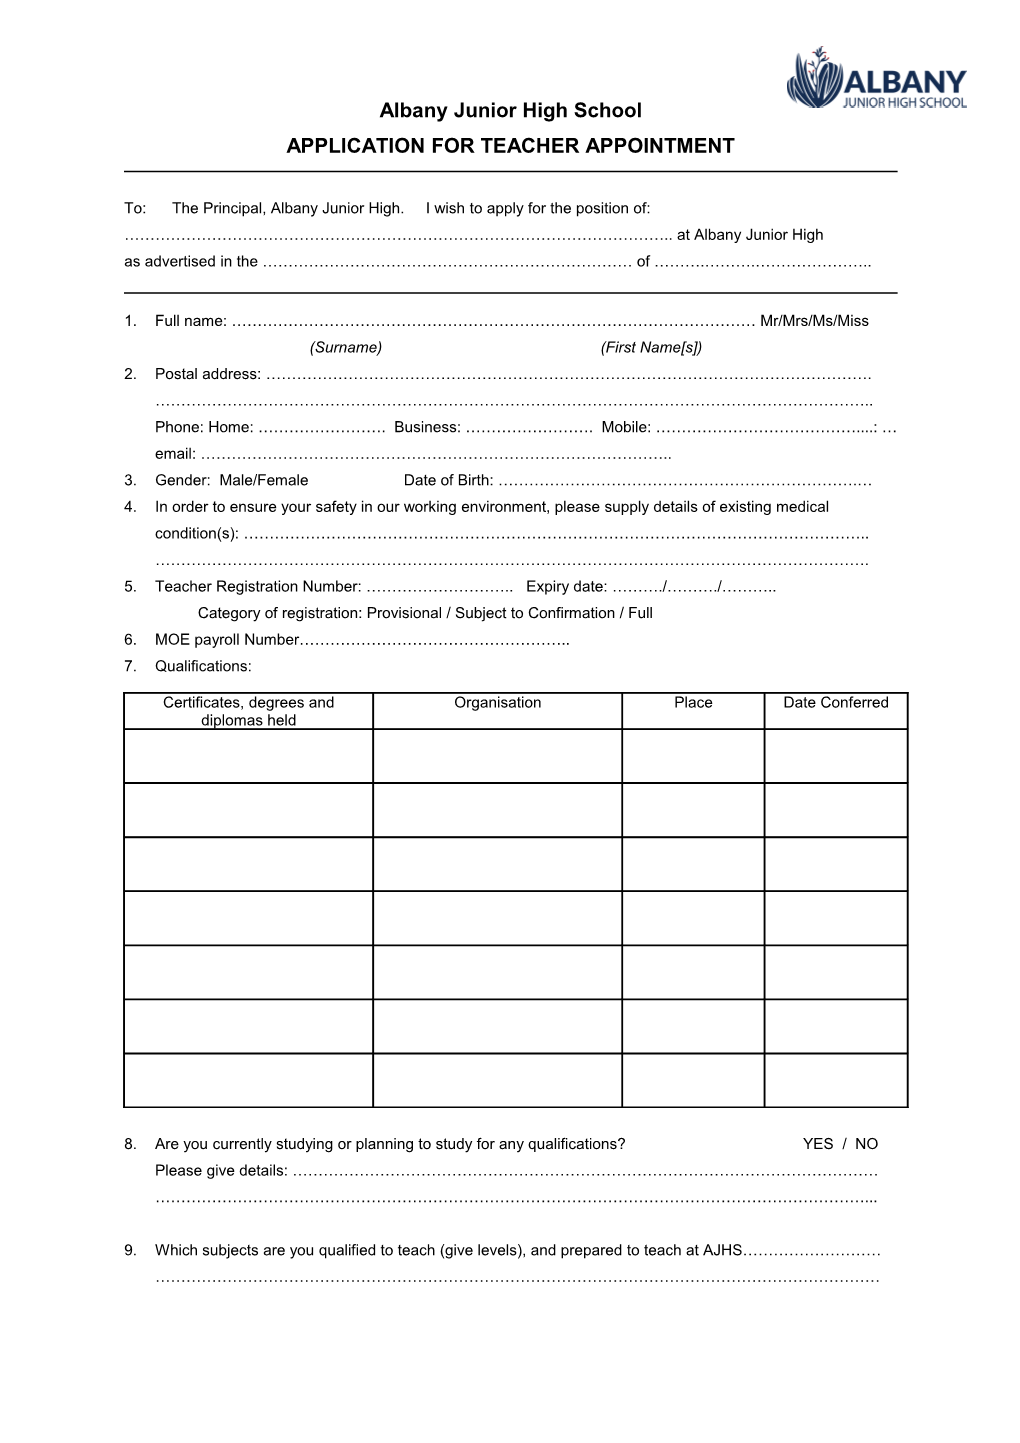 Application for Teacher Appointment